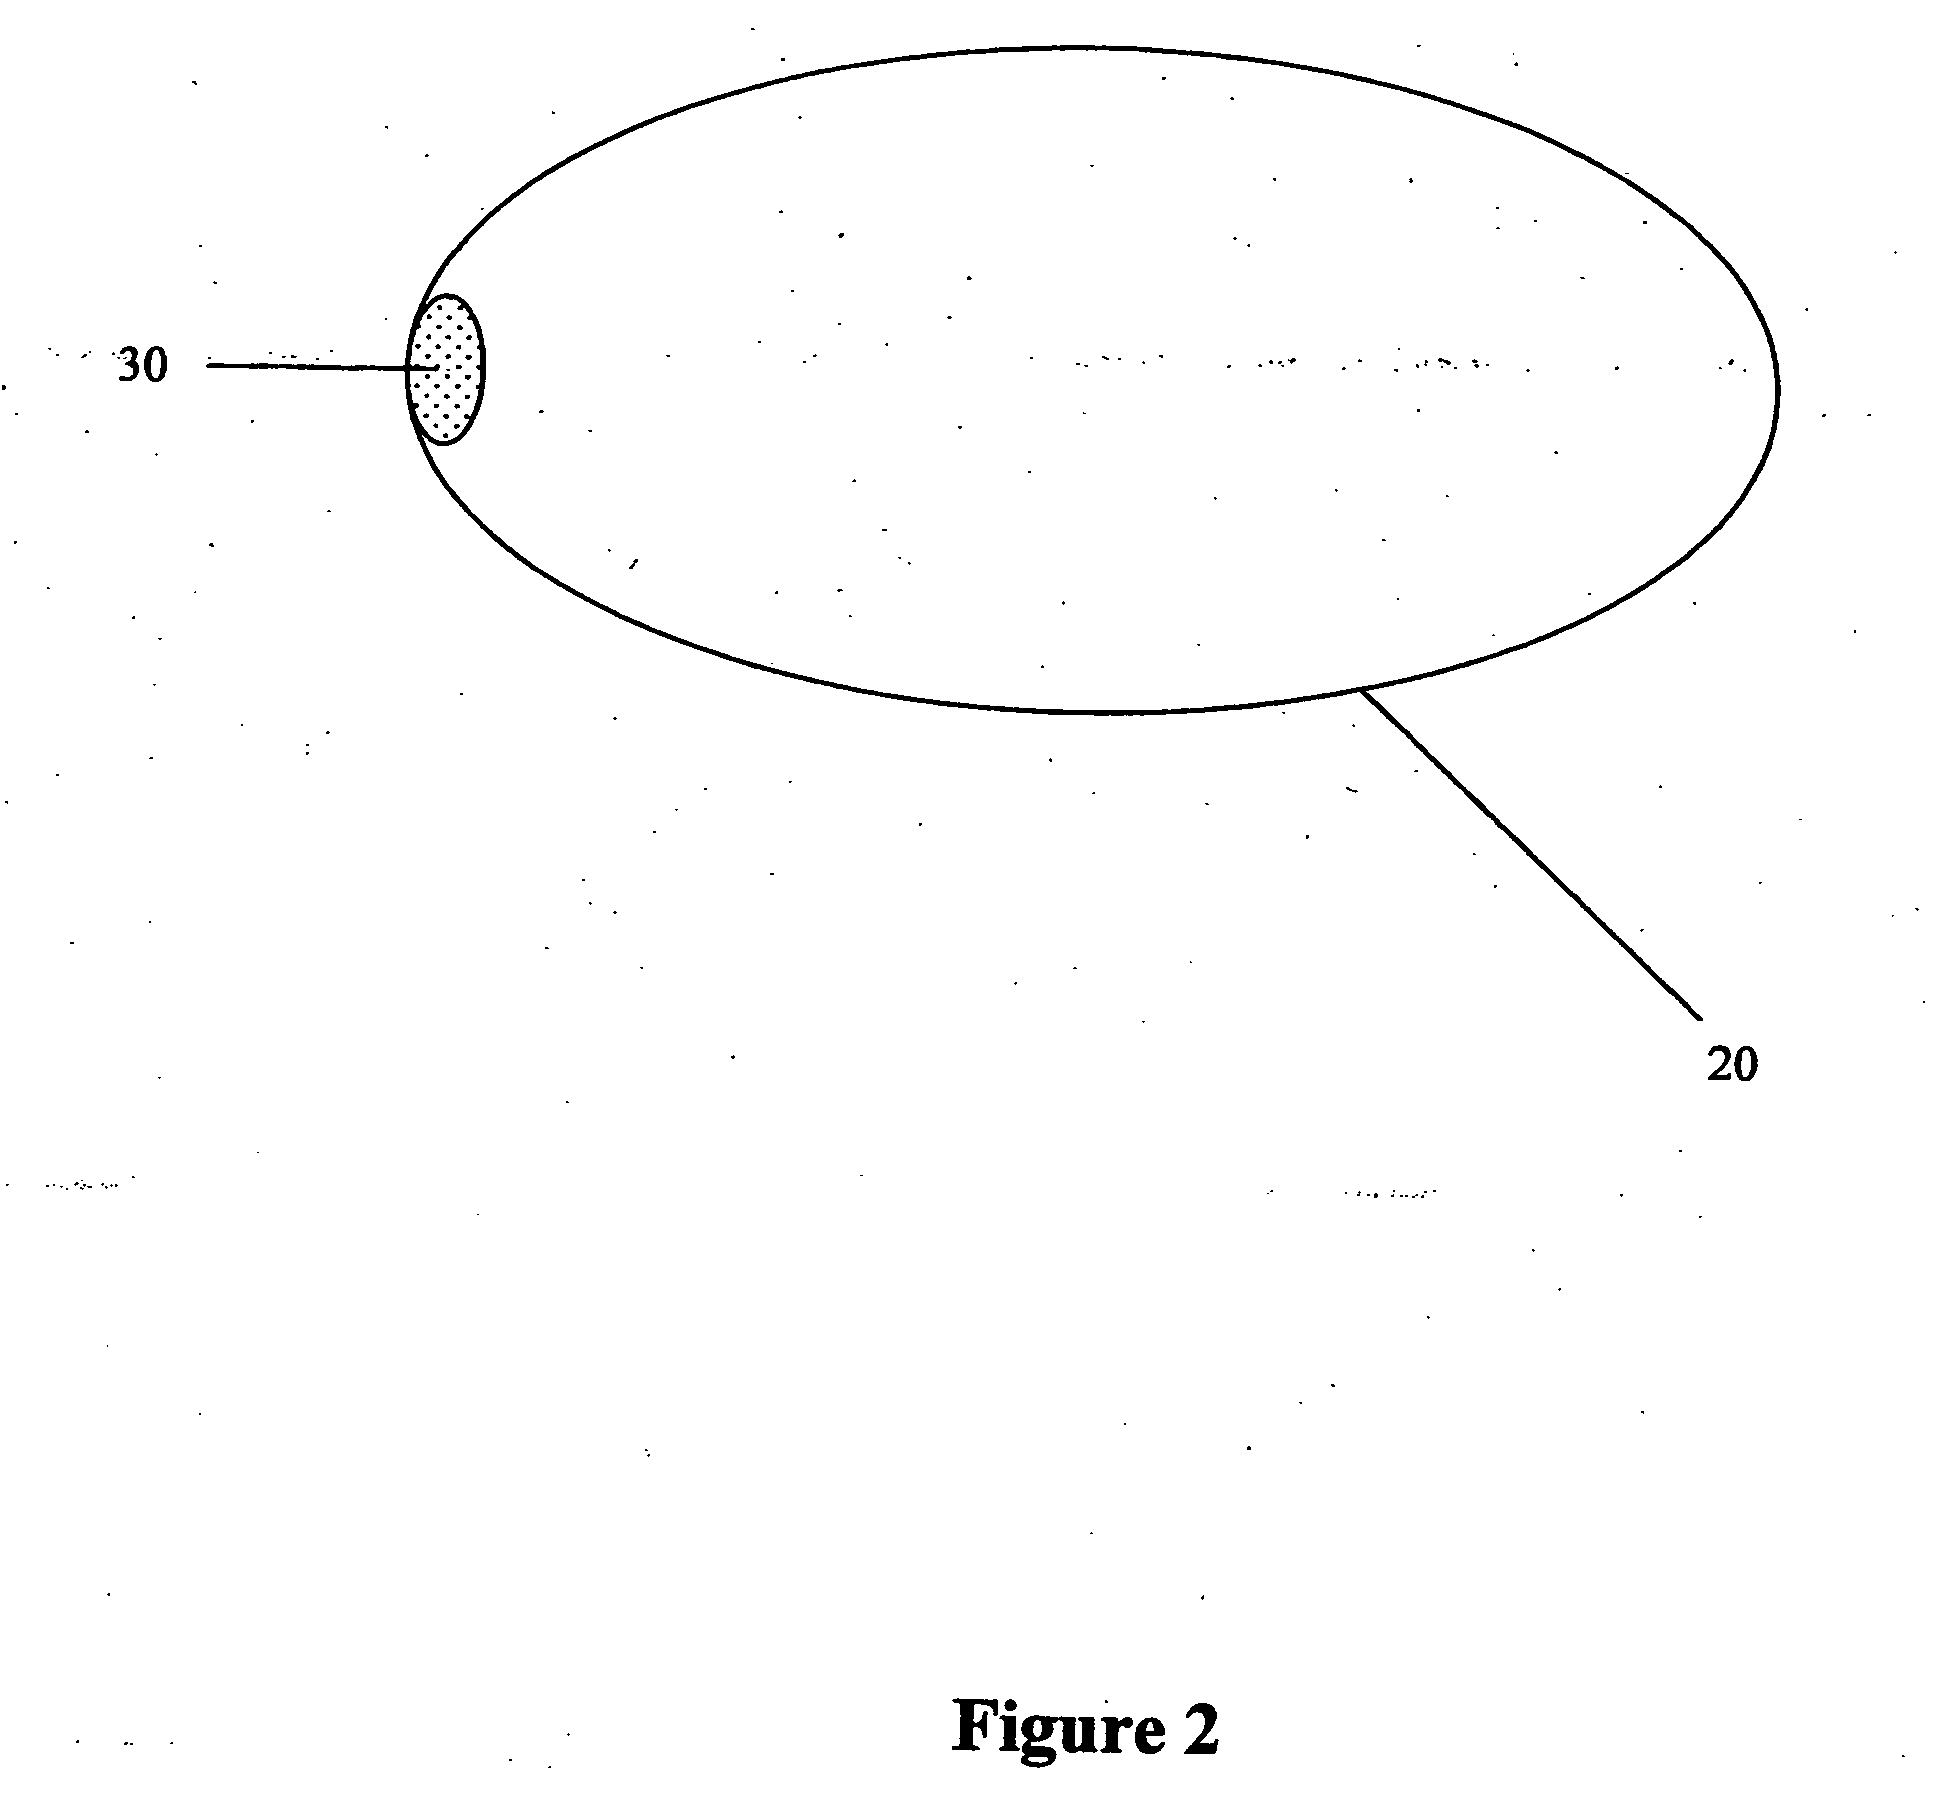 Containers and methods for dispensing single use oral hygiene products